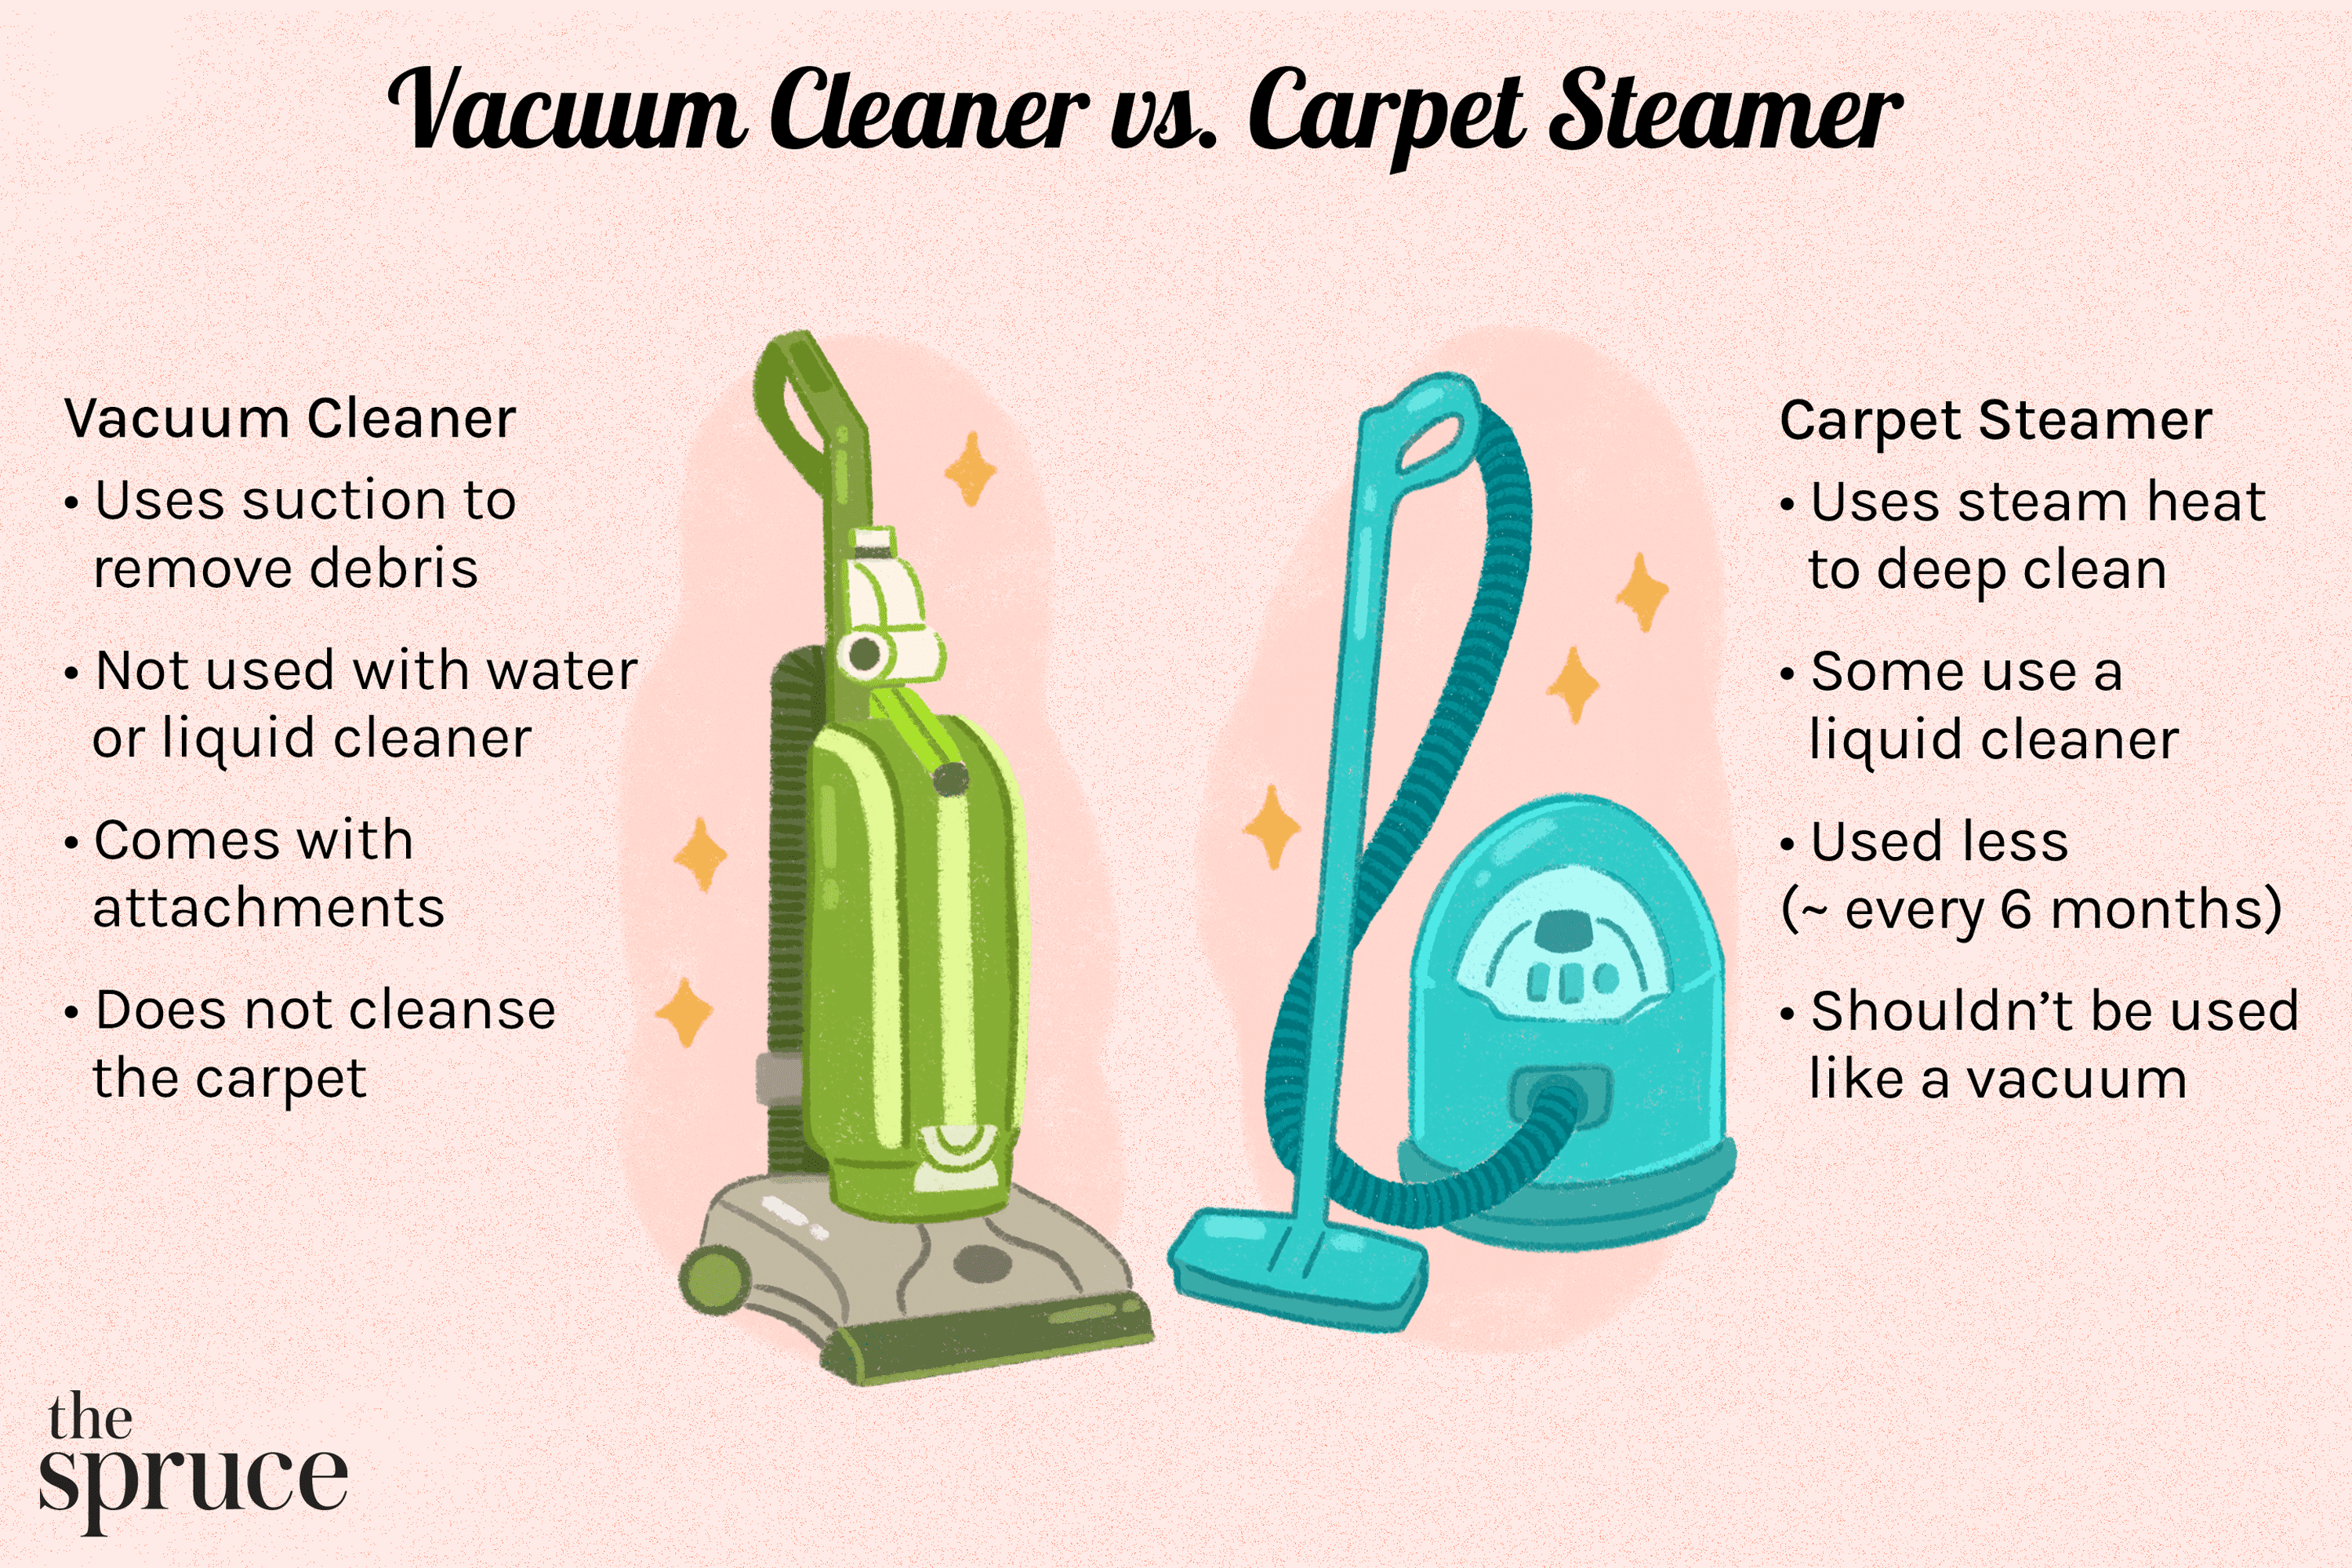 Can a Carpet Cleaner Be Used as a Vacuum?